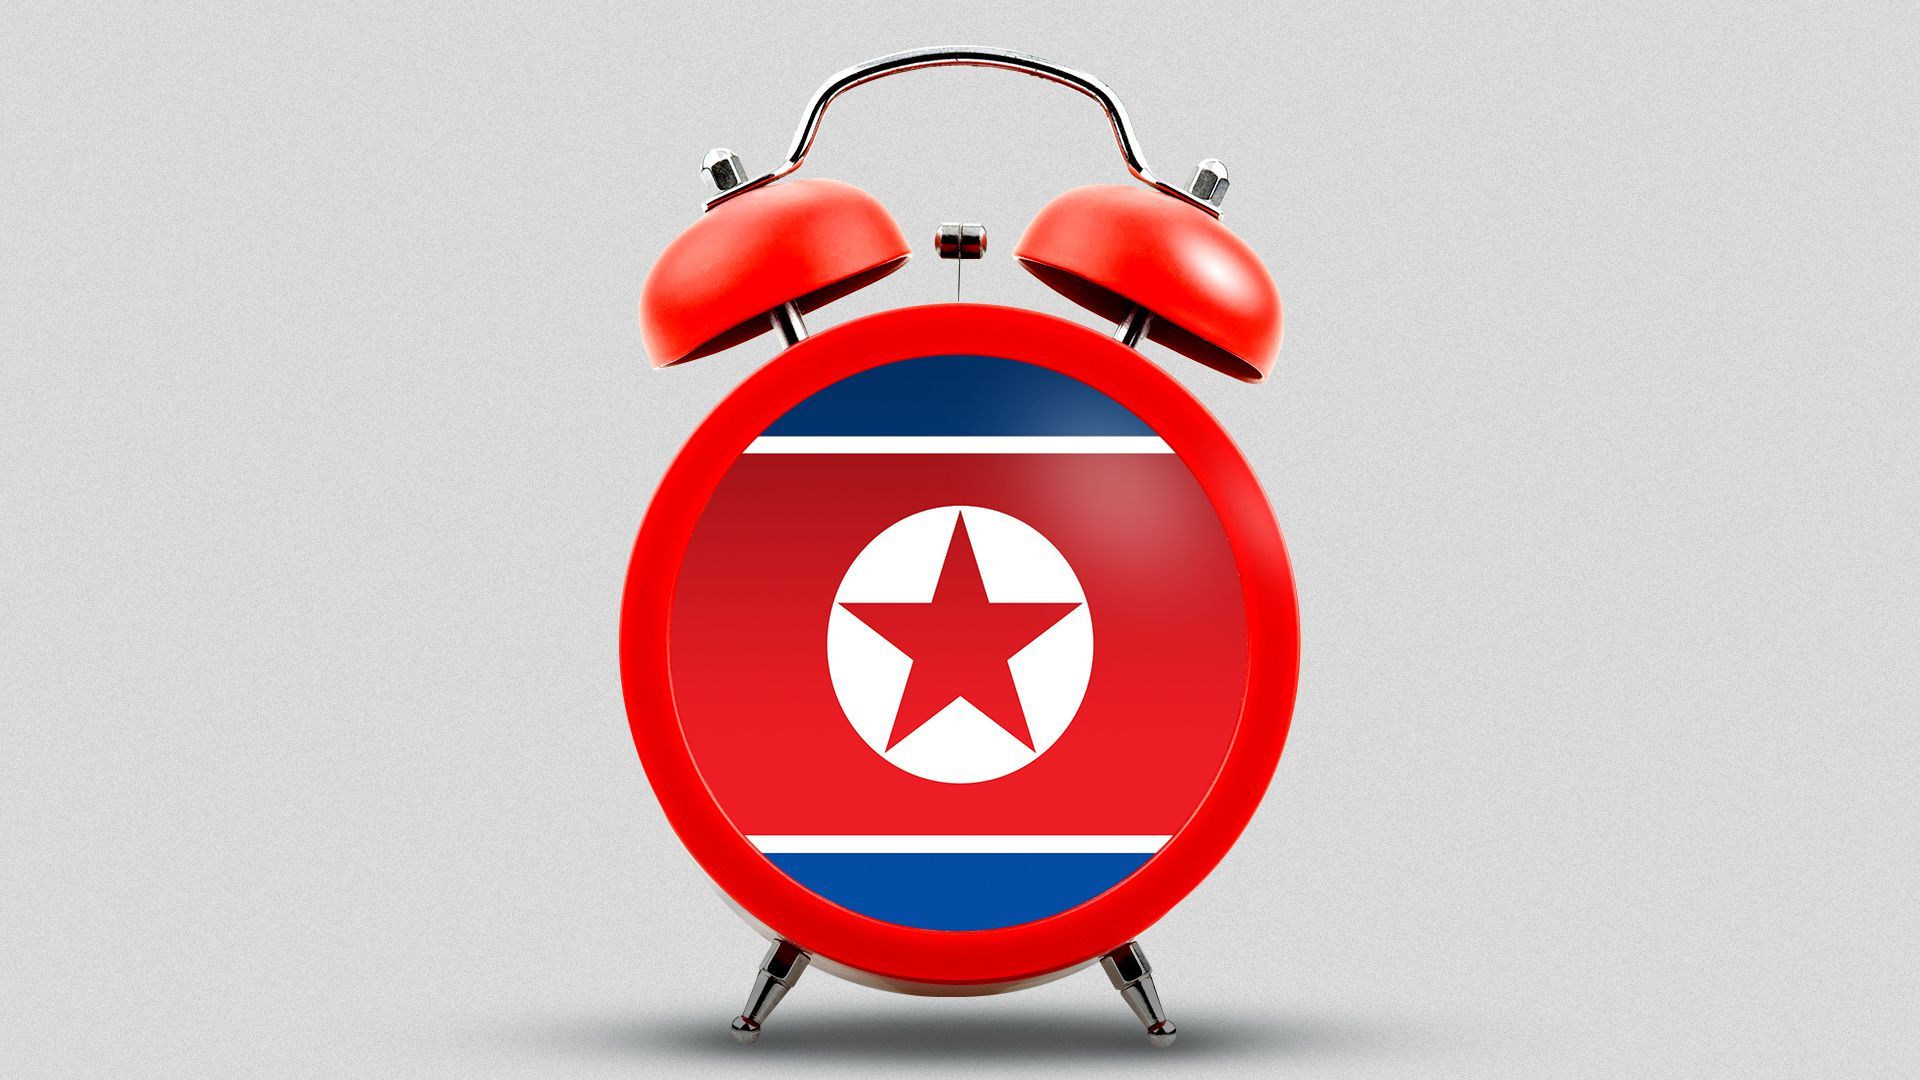 Illustration of an alarm clock with a North Korean flag face